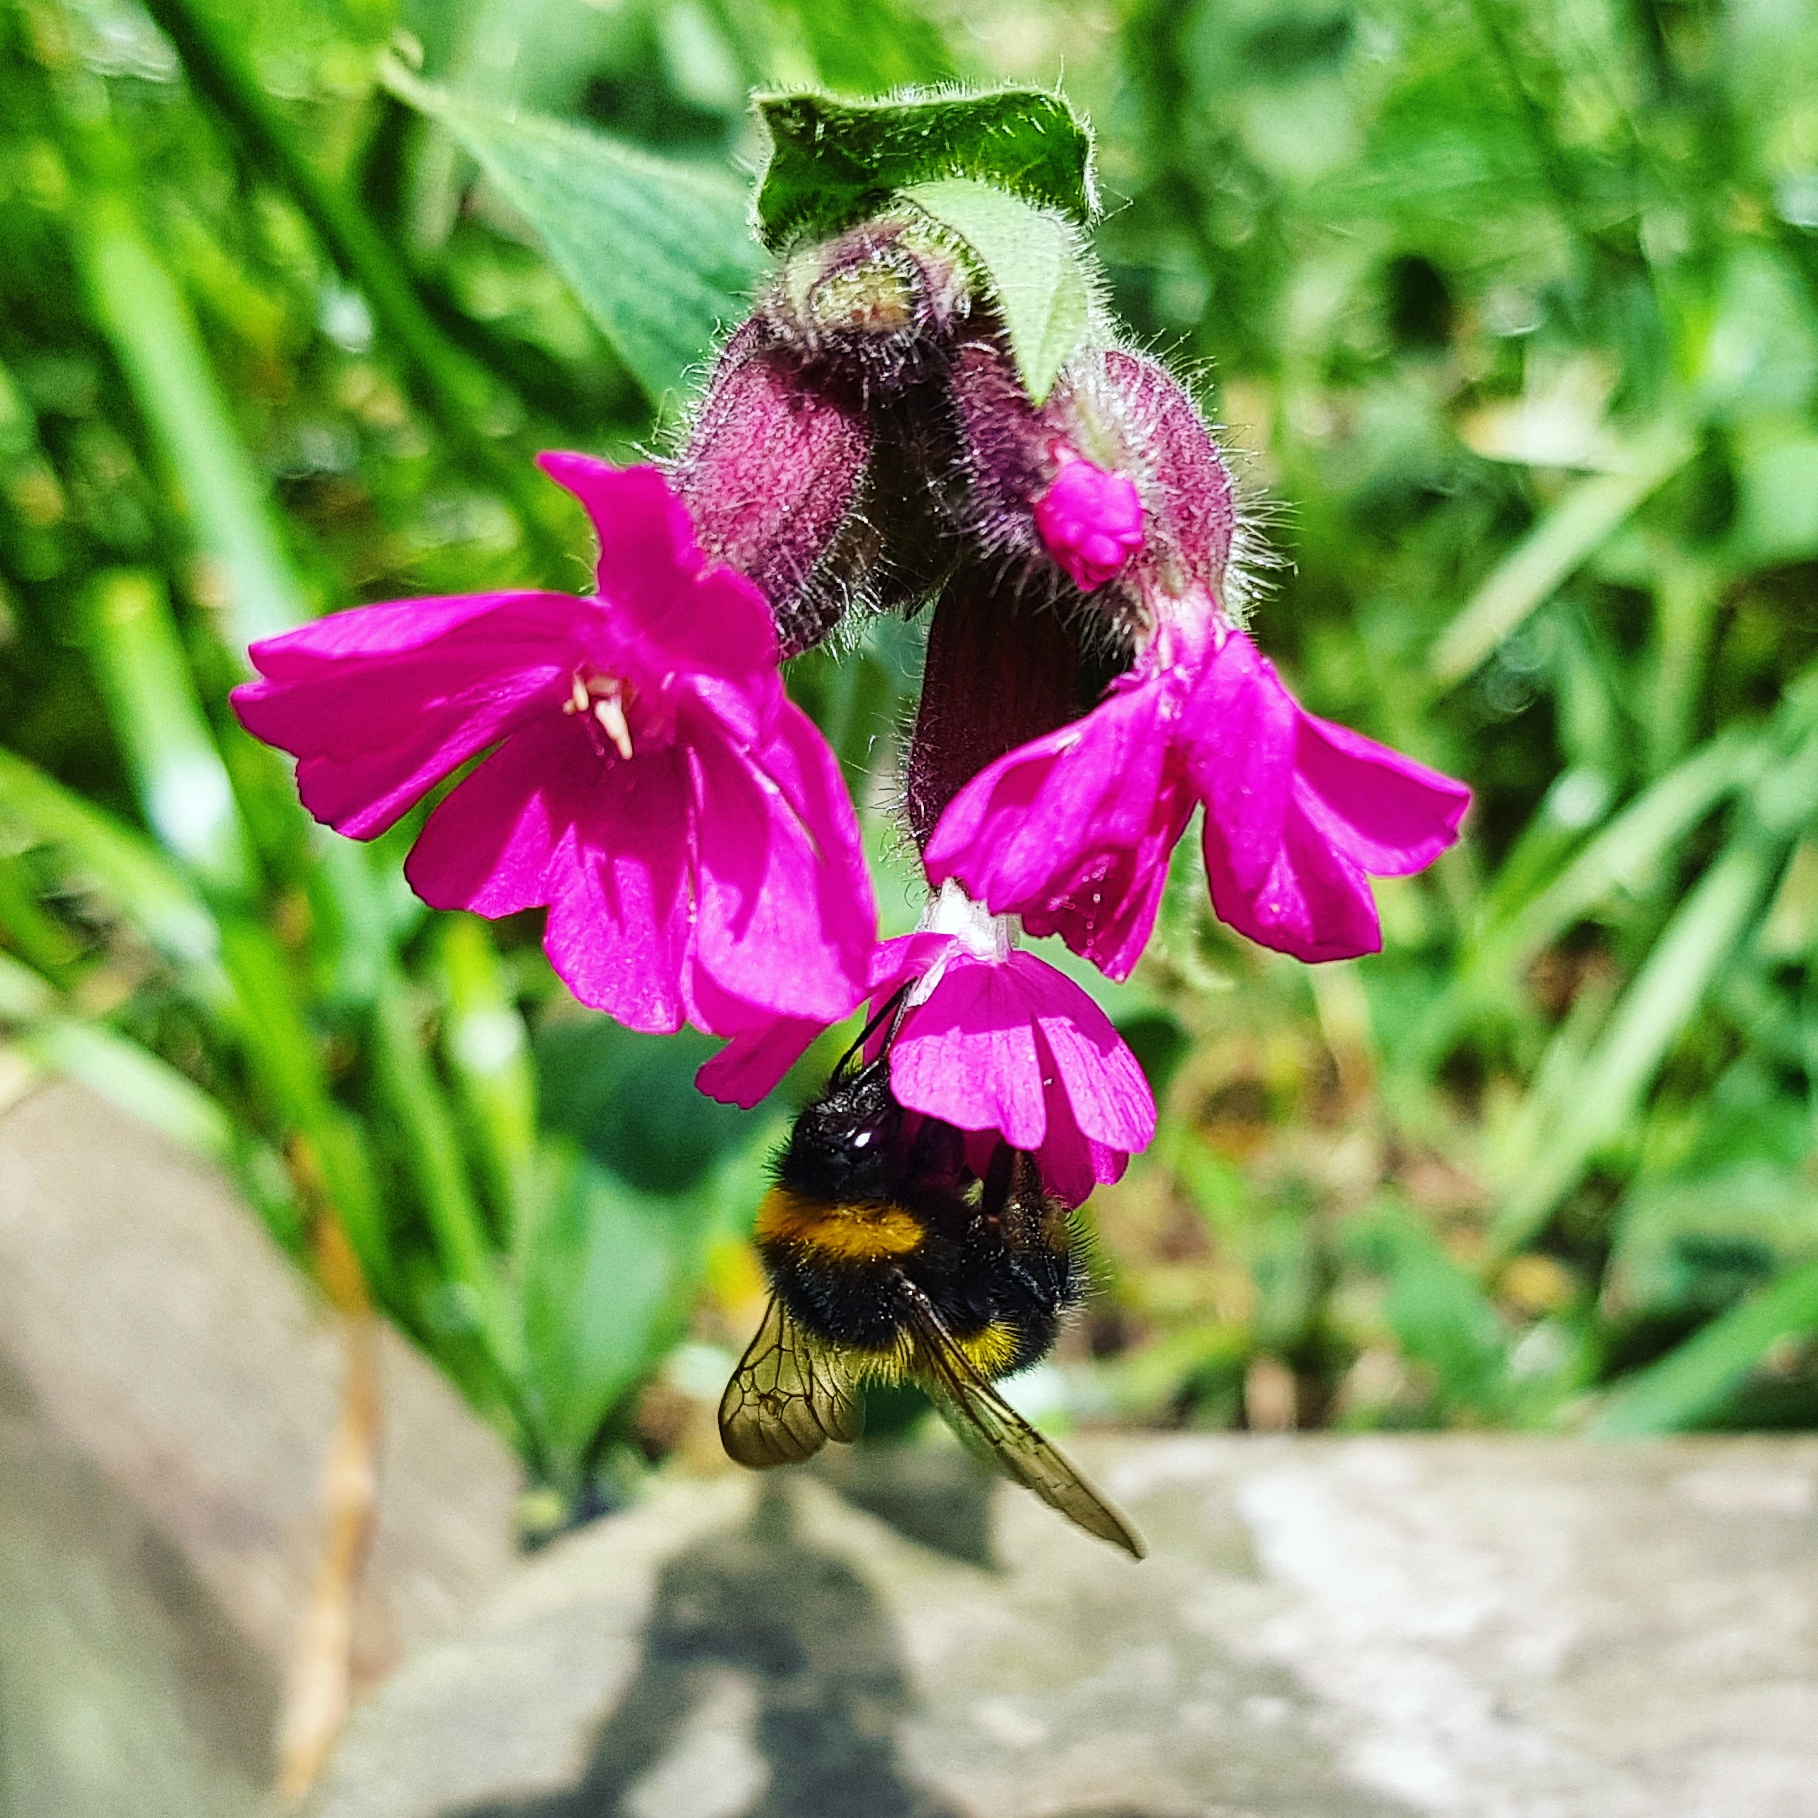 Bees, pollinators, facts about bees,#LivingLifeWild, #30DaysWild, 30 Days Wild, The Wildlife Trusts, home education, freedom to learn, wildlife, nature, insects